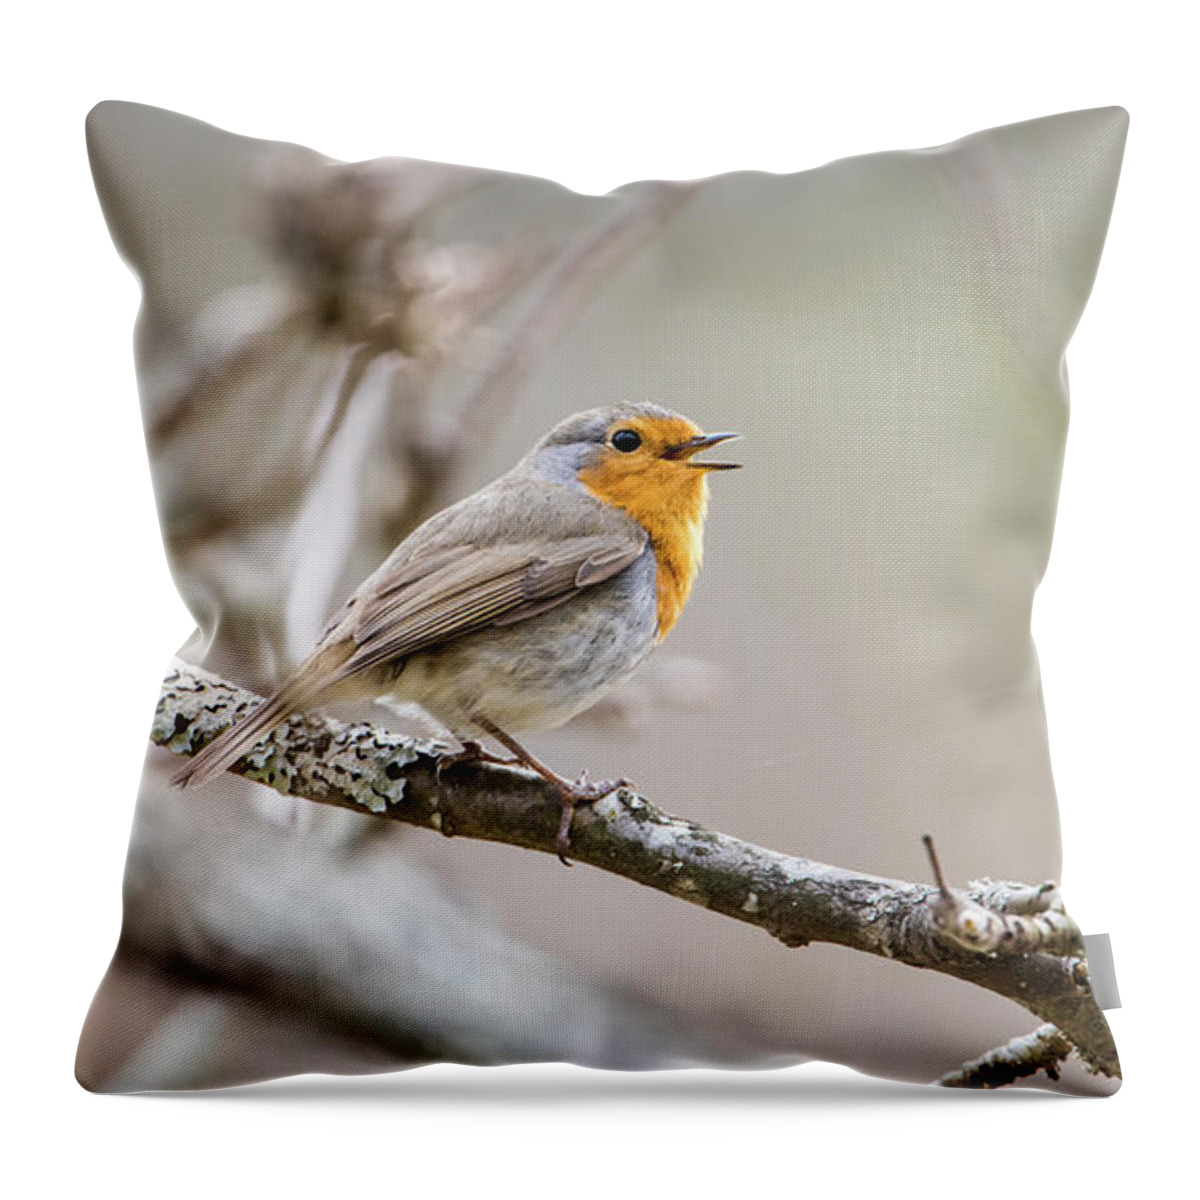 Singing Robin Throw Pillow featuring the photograph Singing Robin by Torbjorn Swenelius